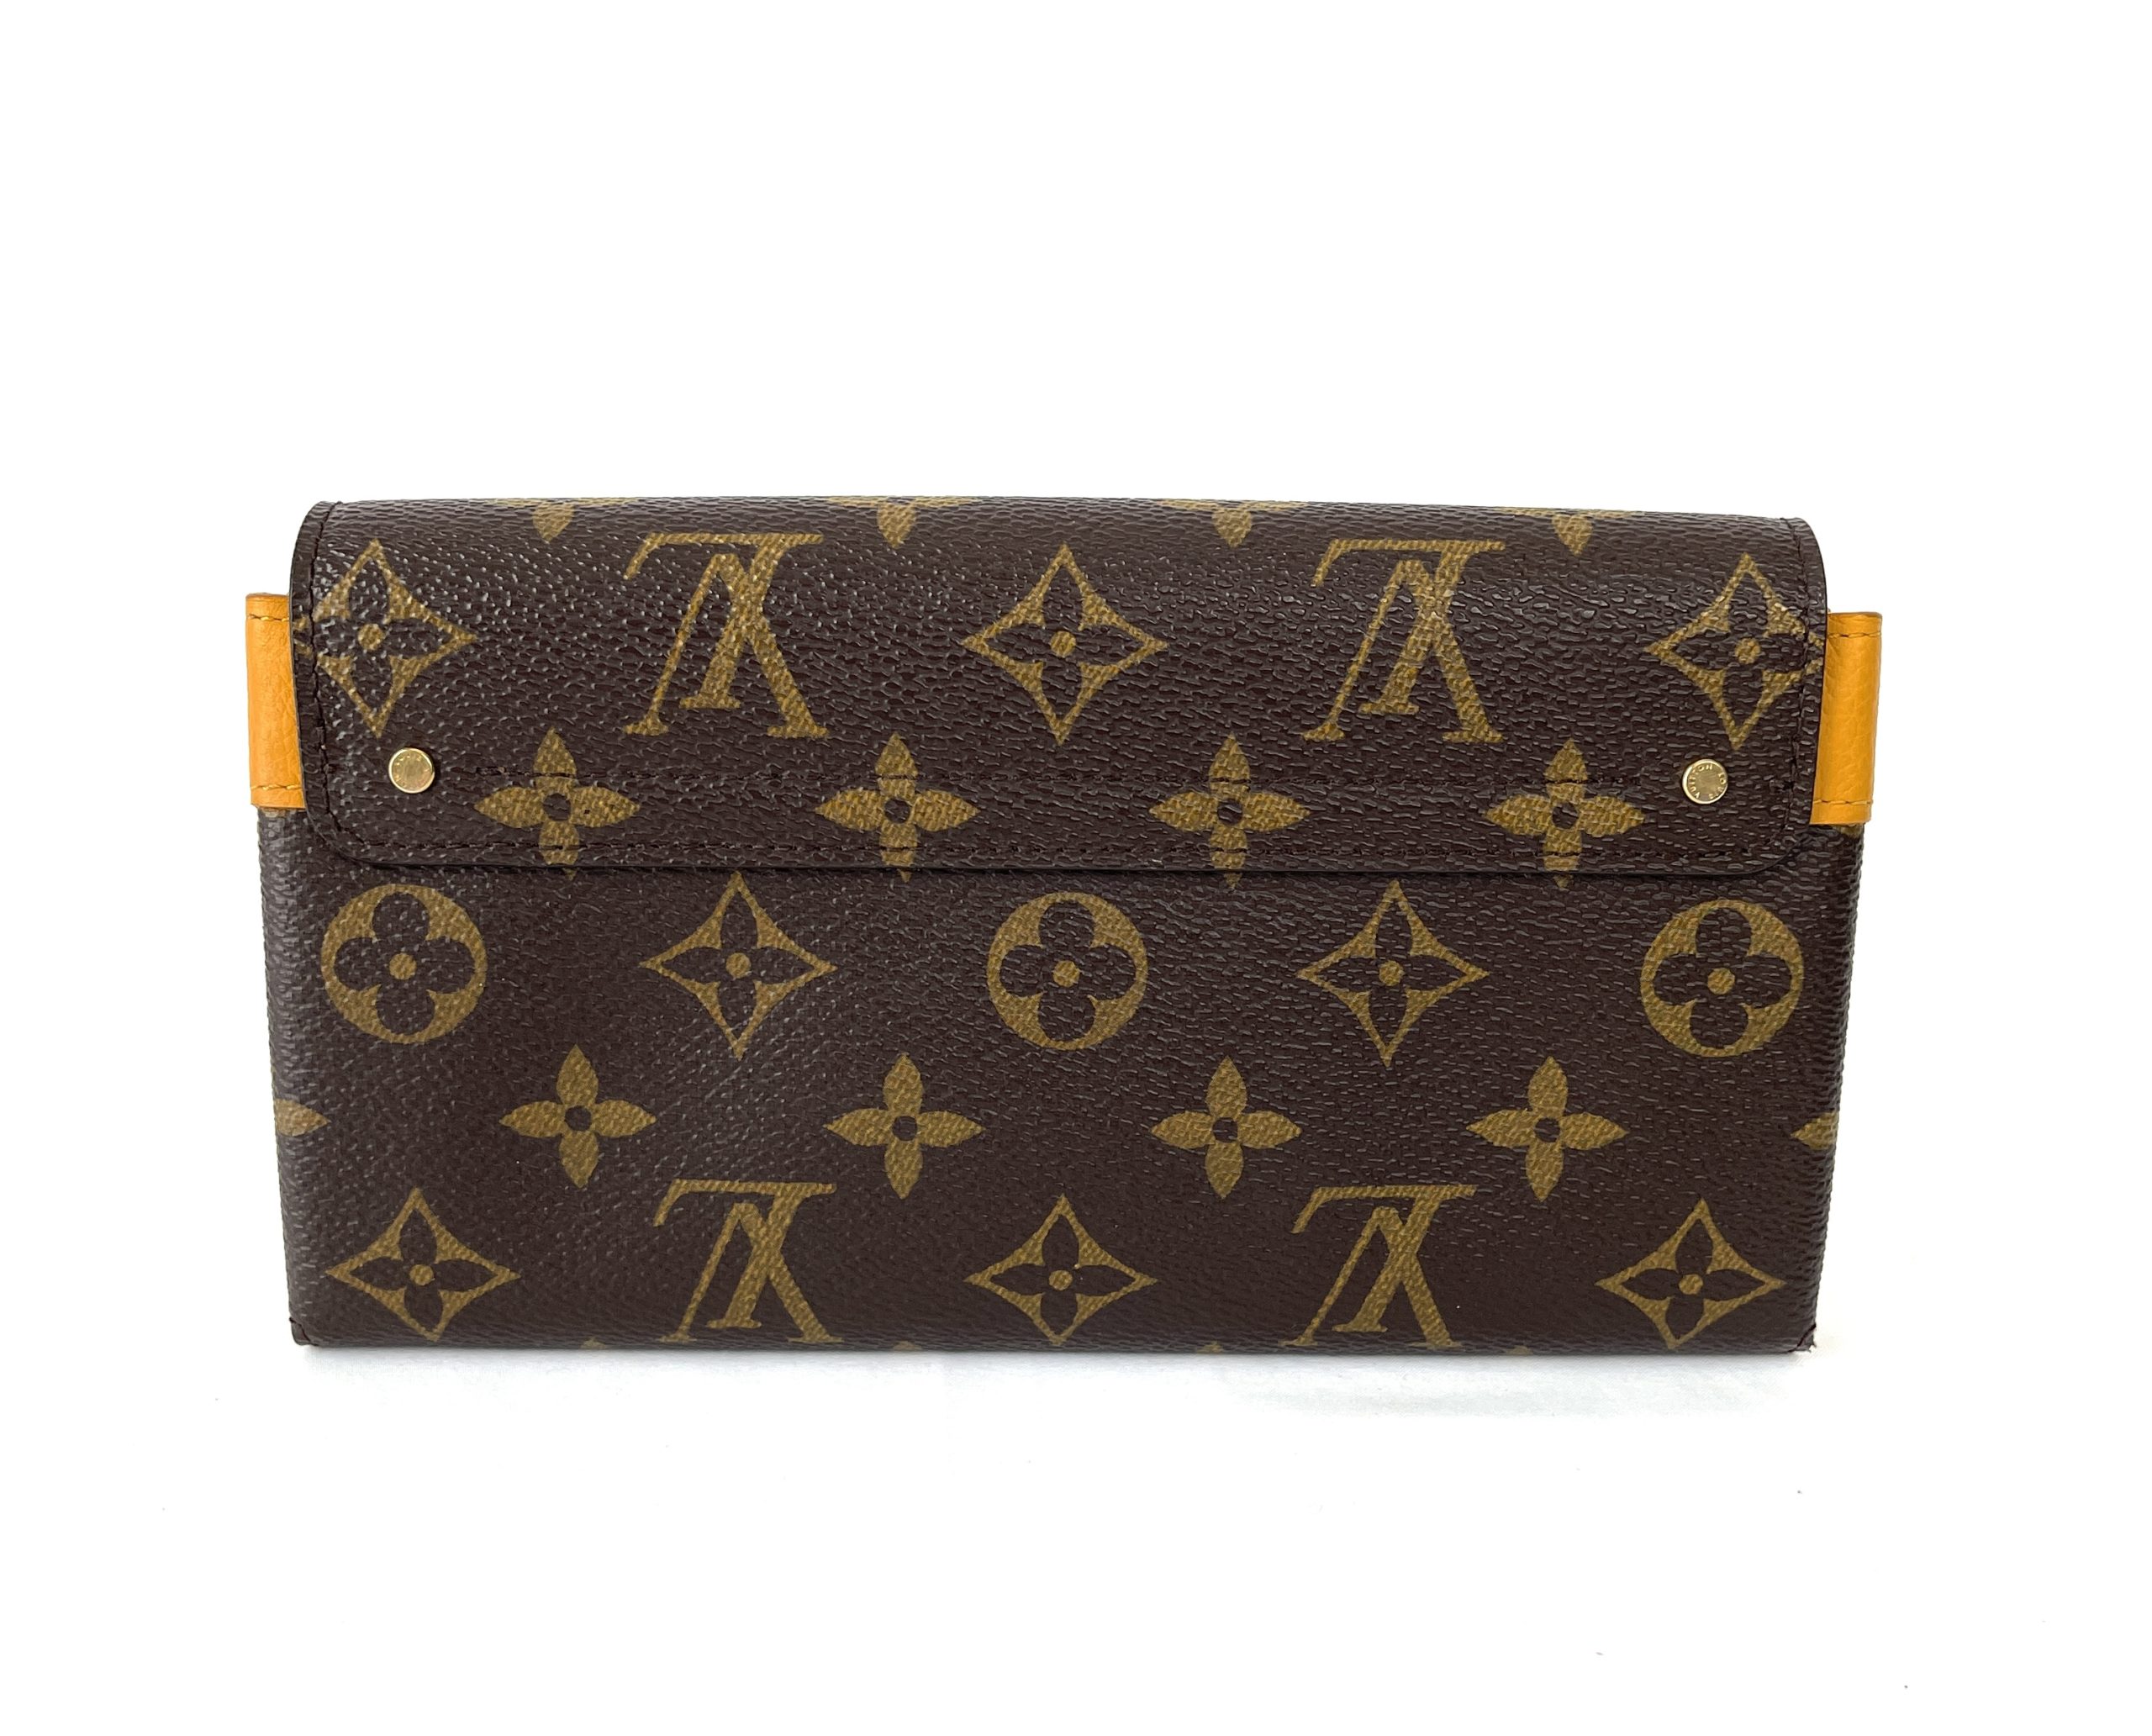 Louis Vuitton Monogram Elysee Wallet Price: $400 Item: 45013-2 To Inquire  or purchase, Direct message us or visit our website…